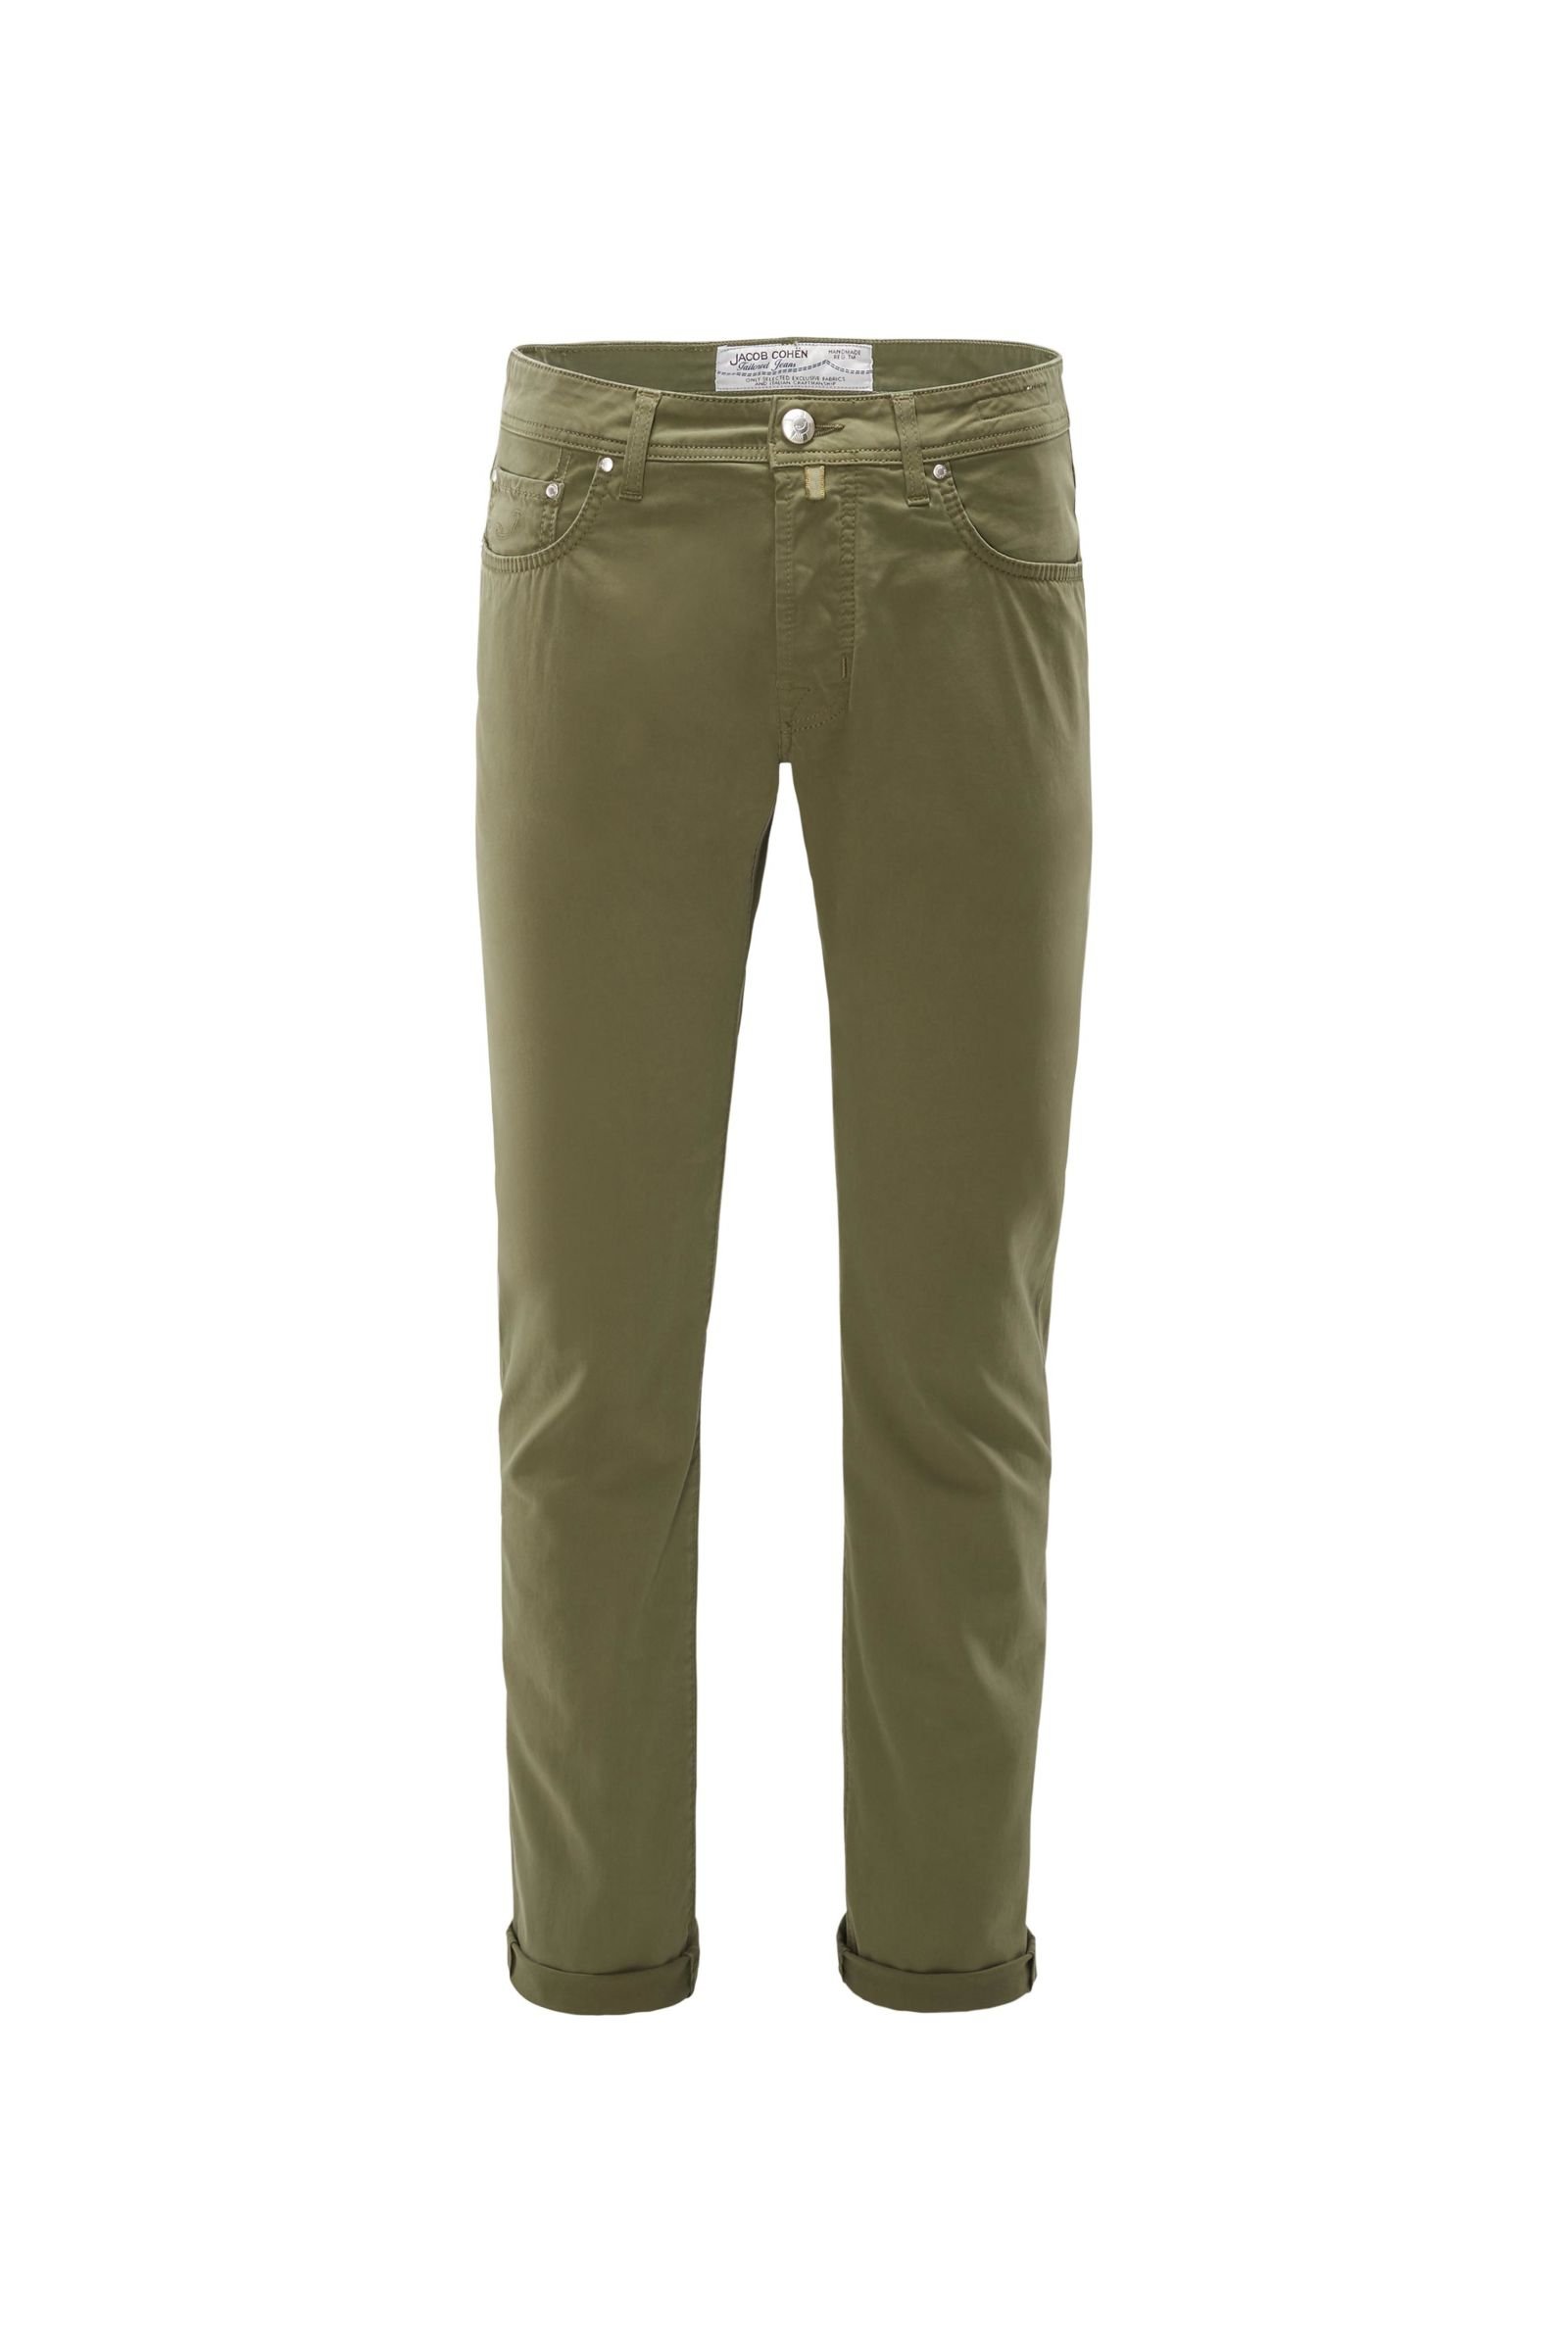 Cotton trousers 'PW688 Comfort Slim Fit' olive